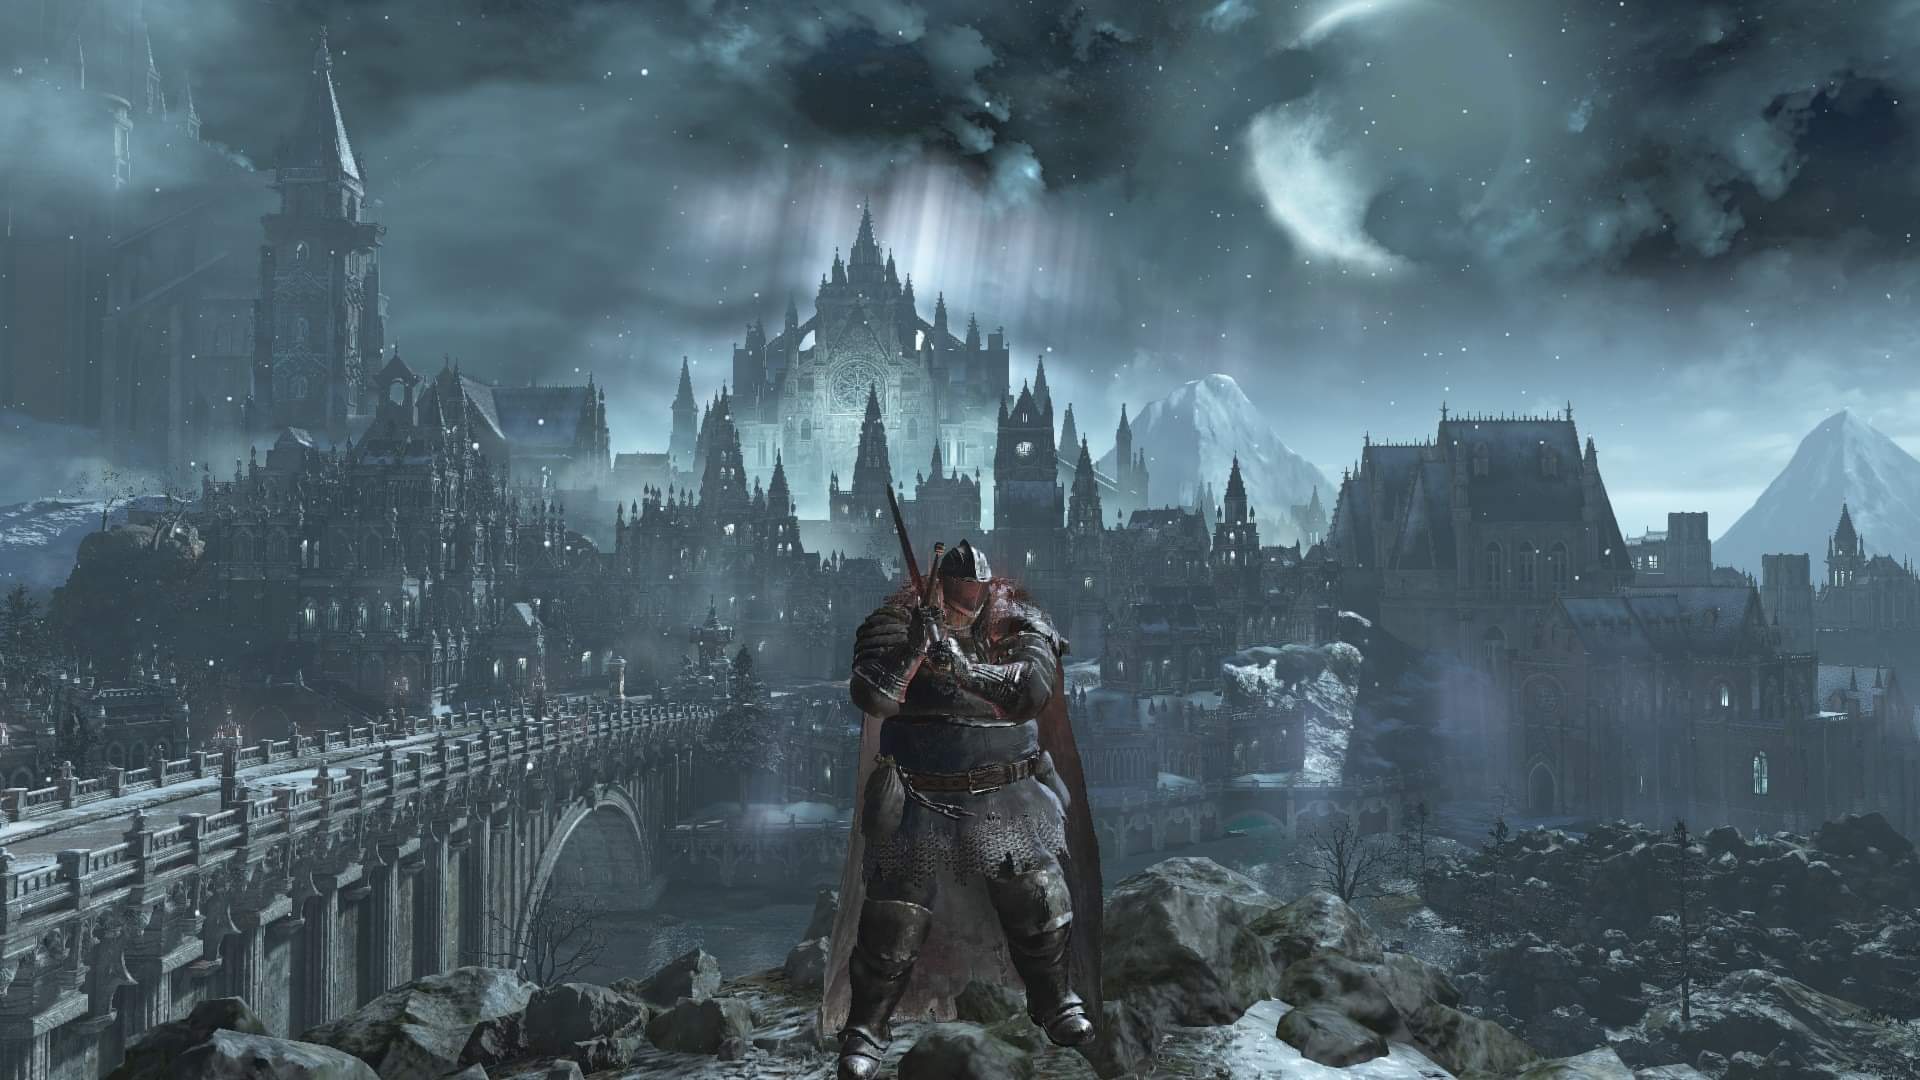 What's your favourite scenery location in DS3? I need some ideas for wallpaper